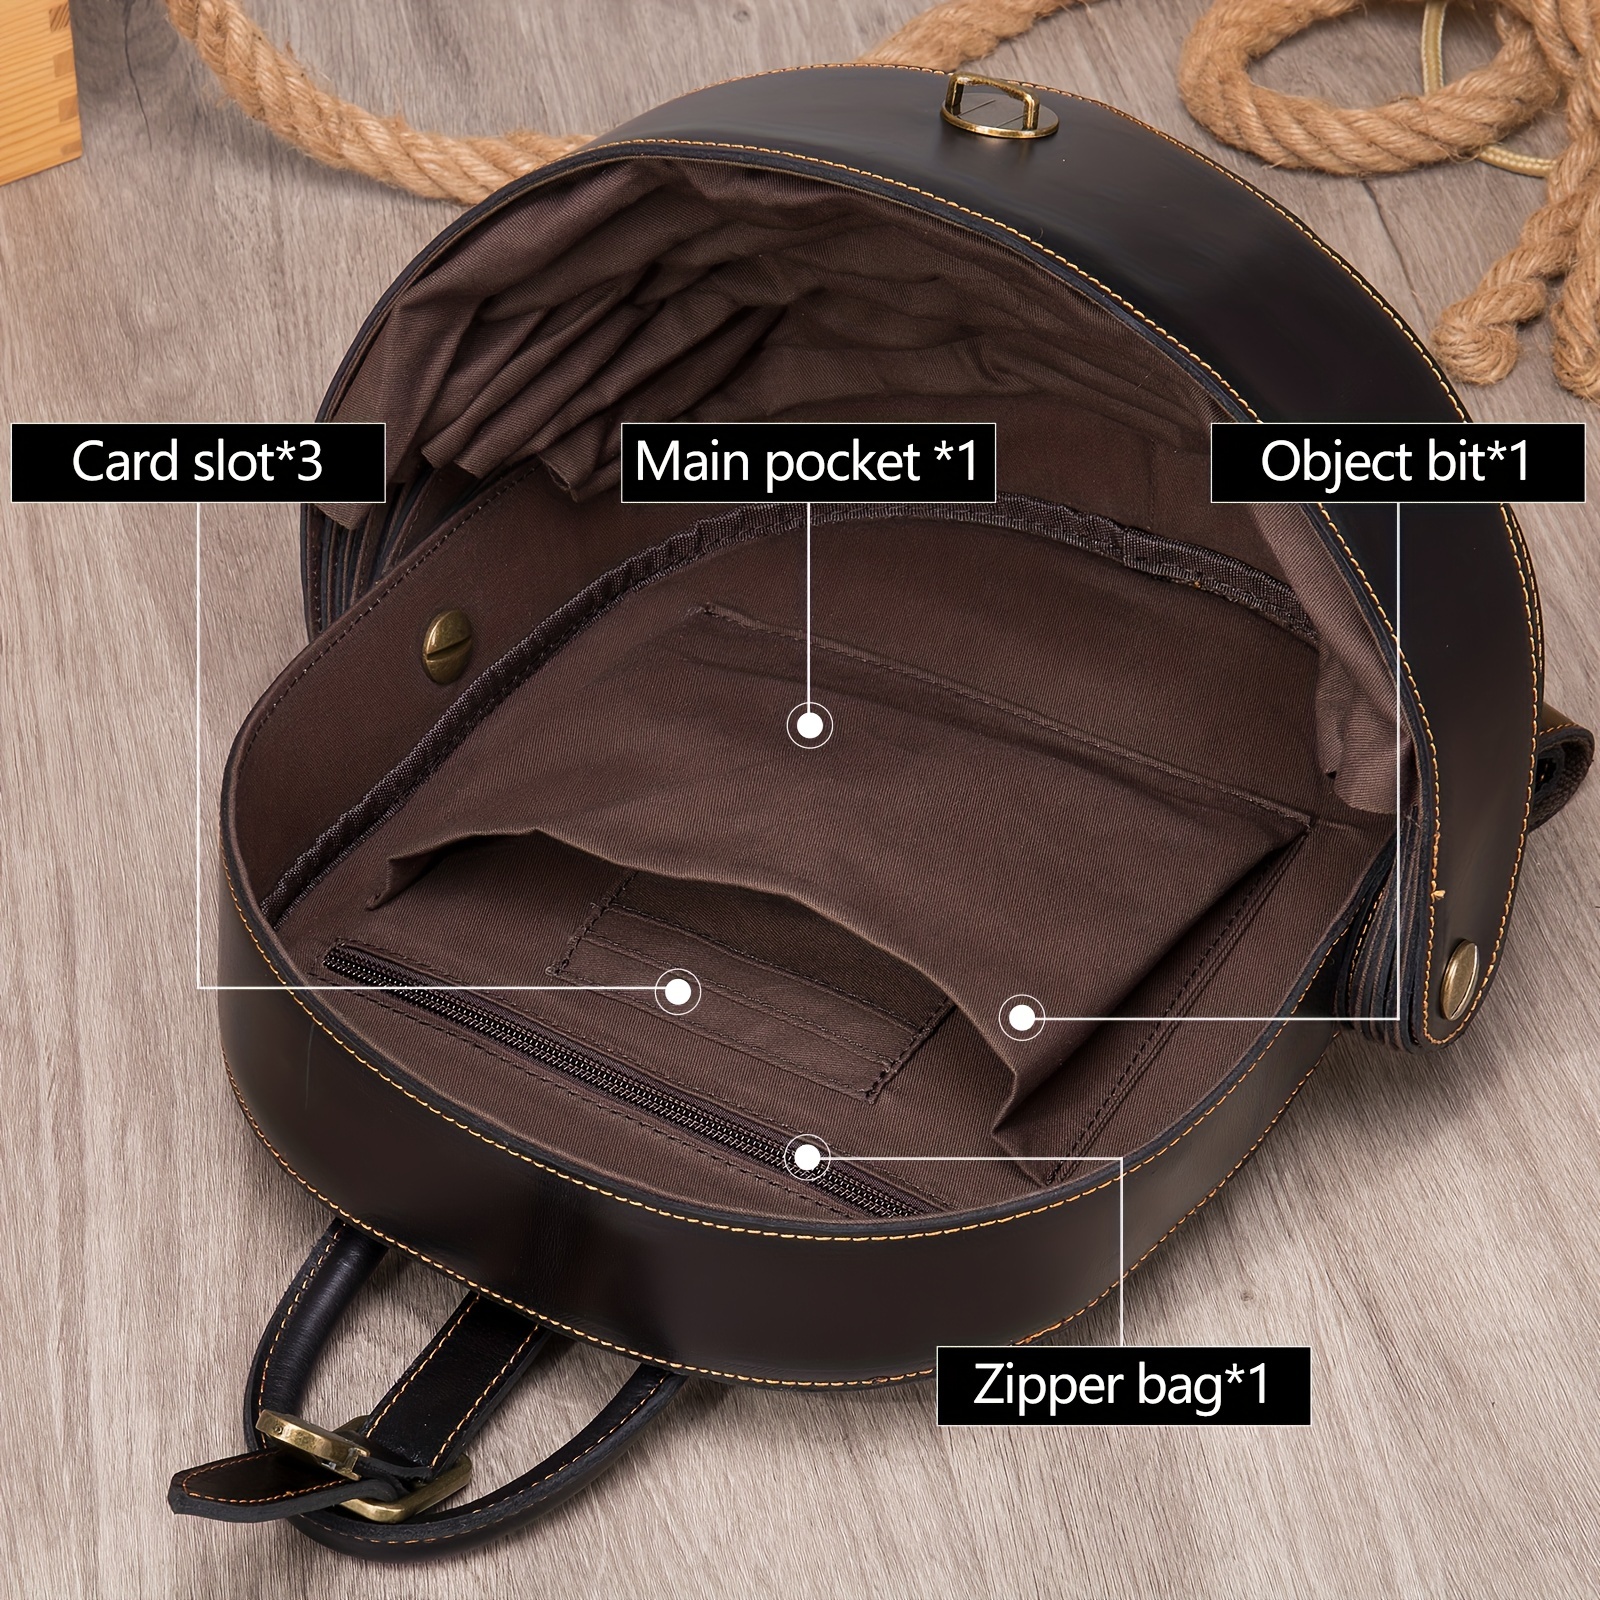 Round leather backpack